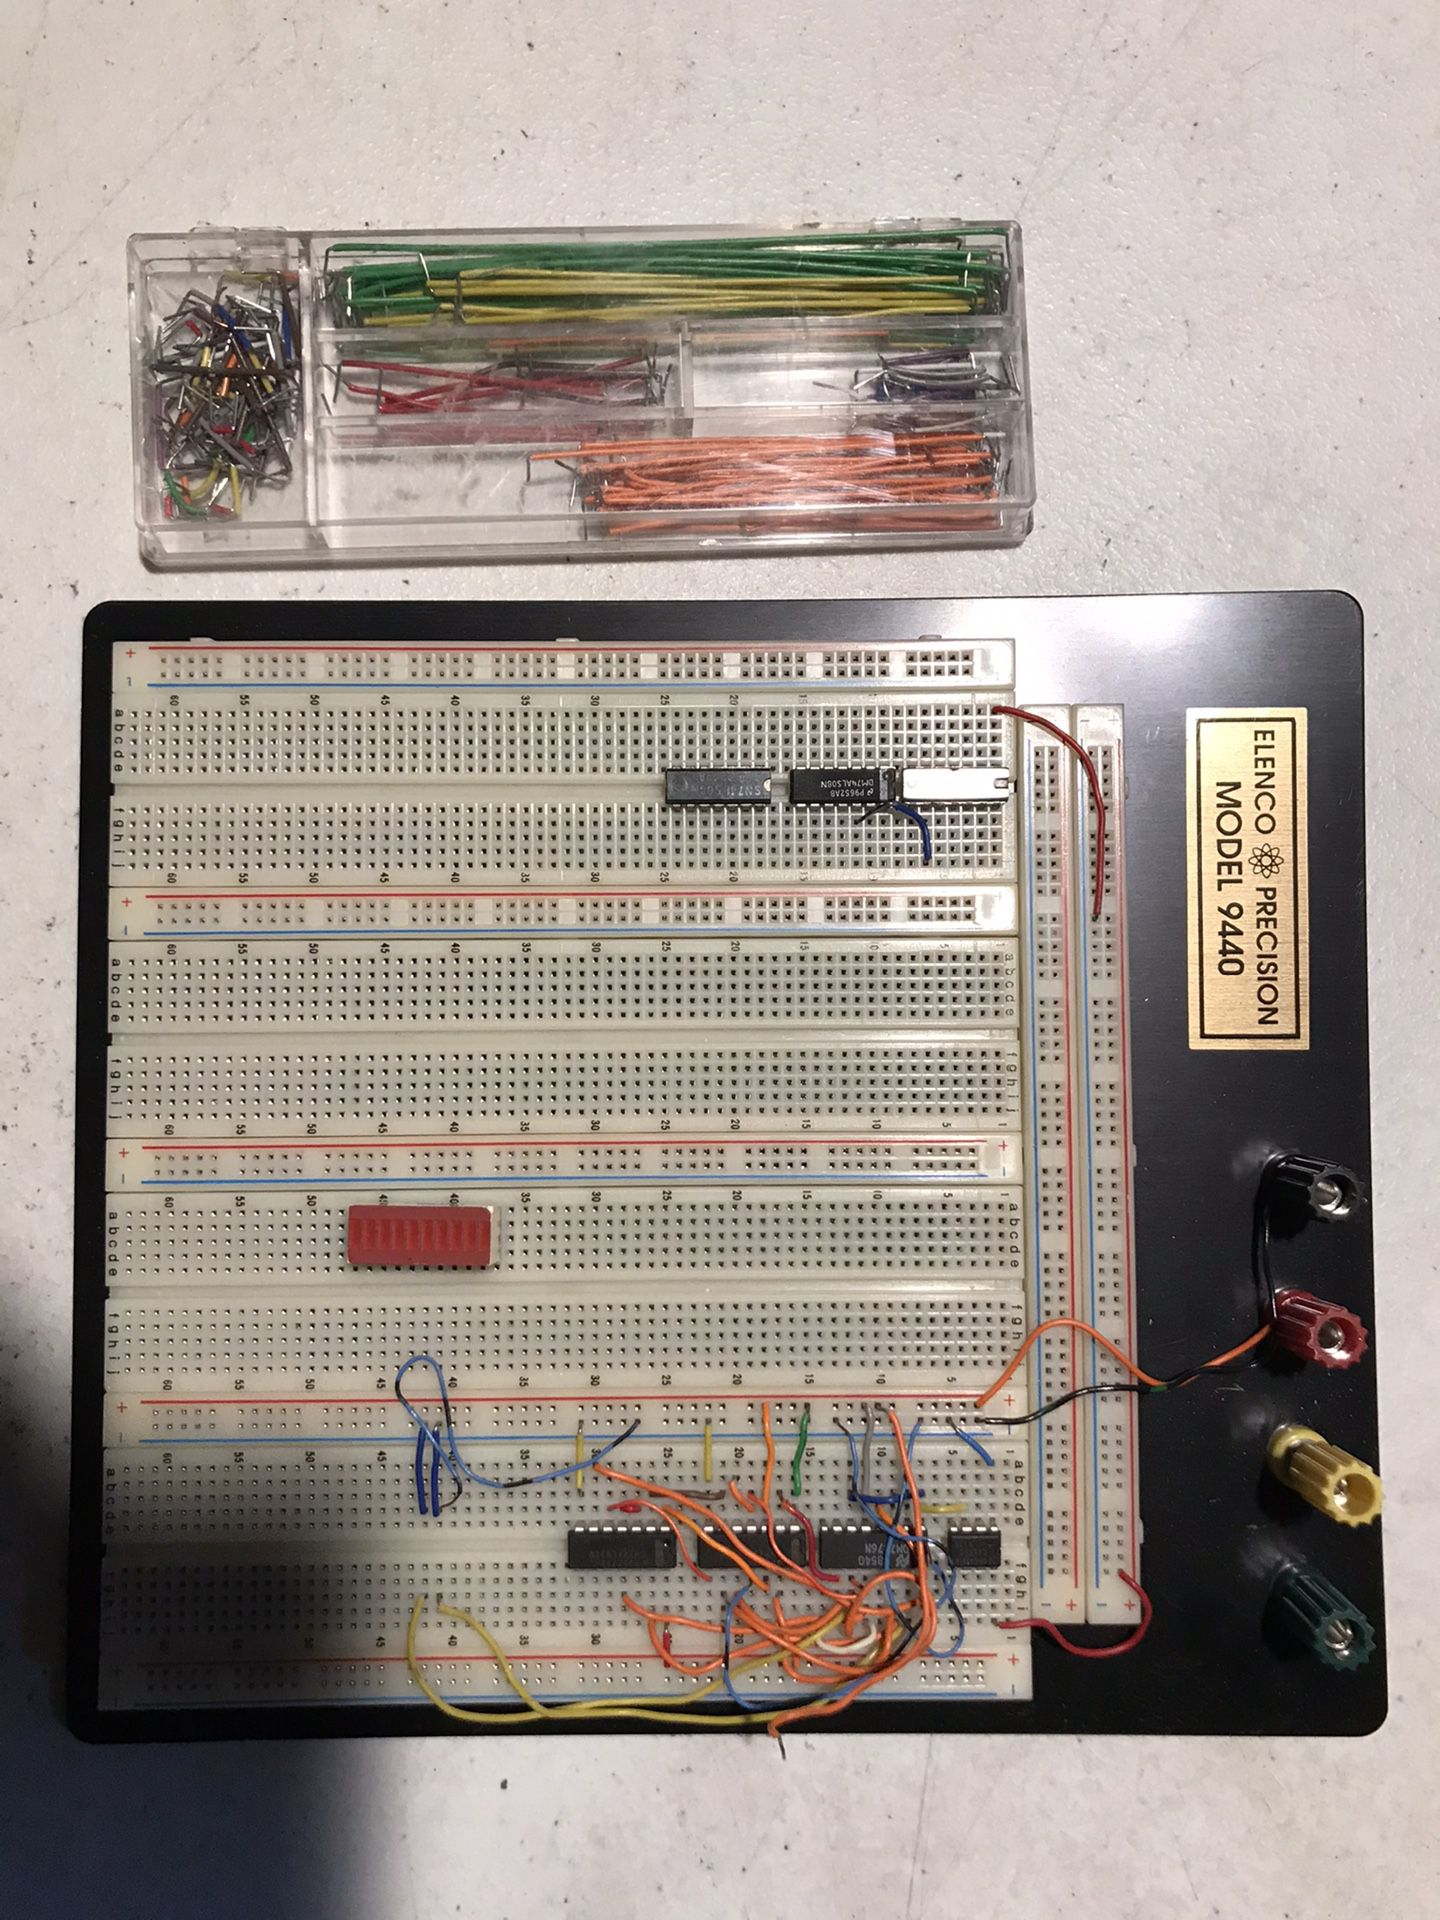 Breadboard 9440 for electrical engineer